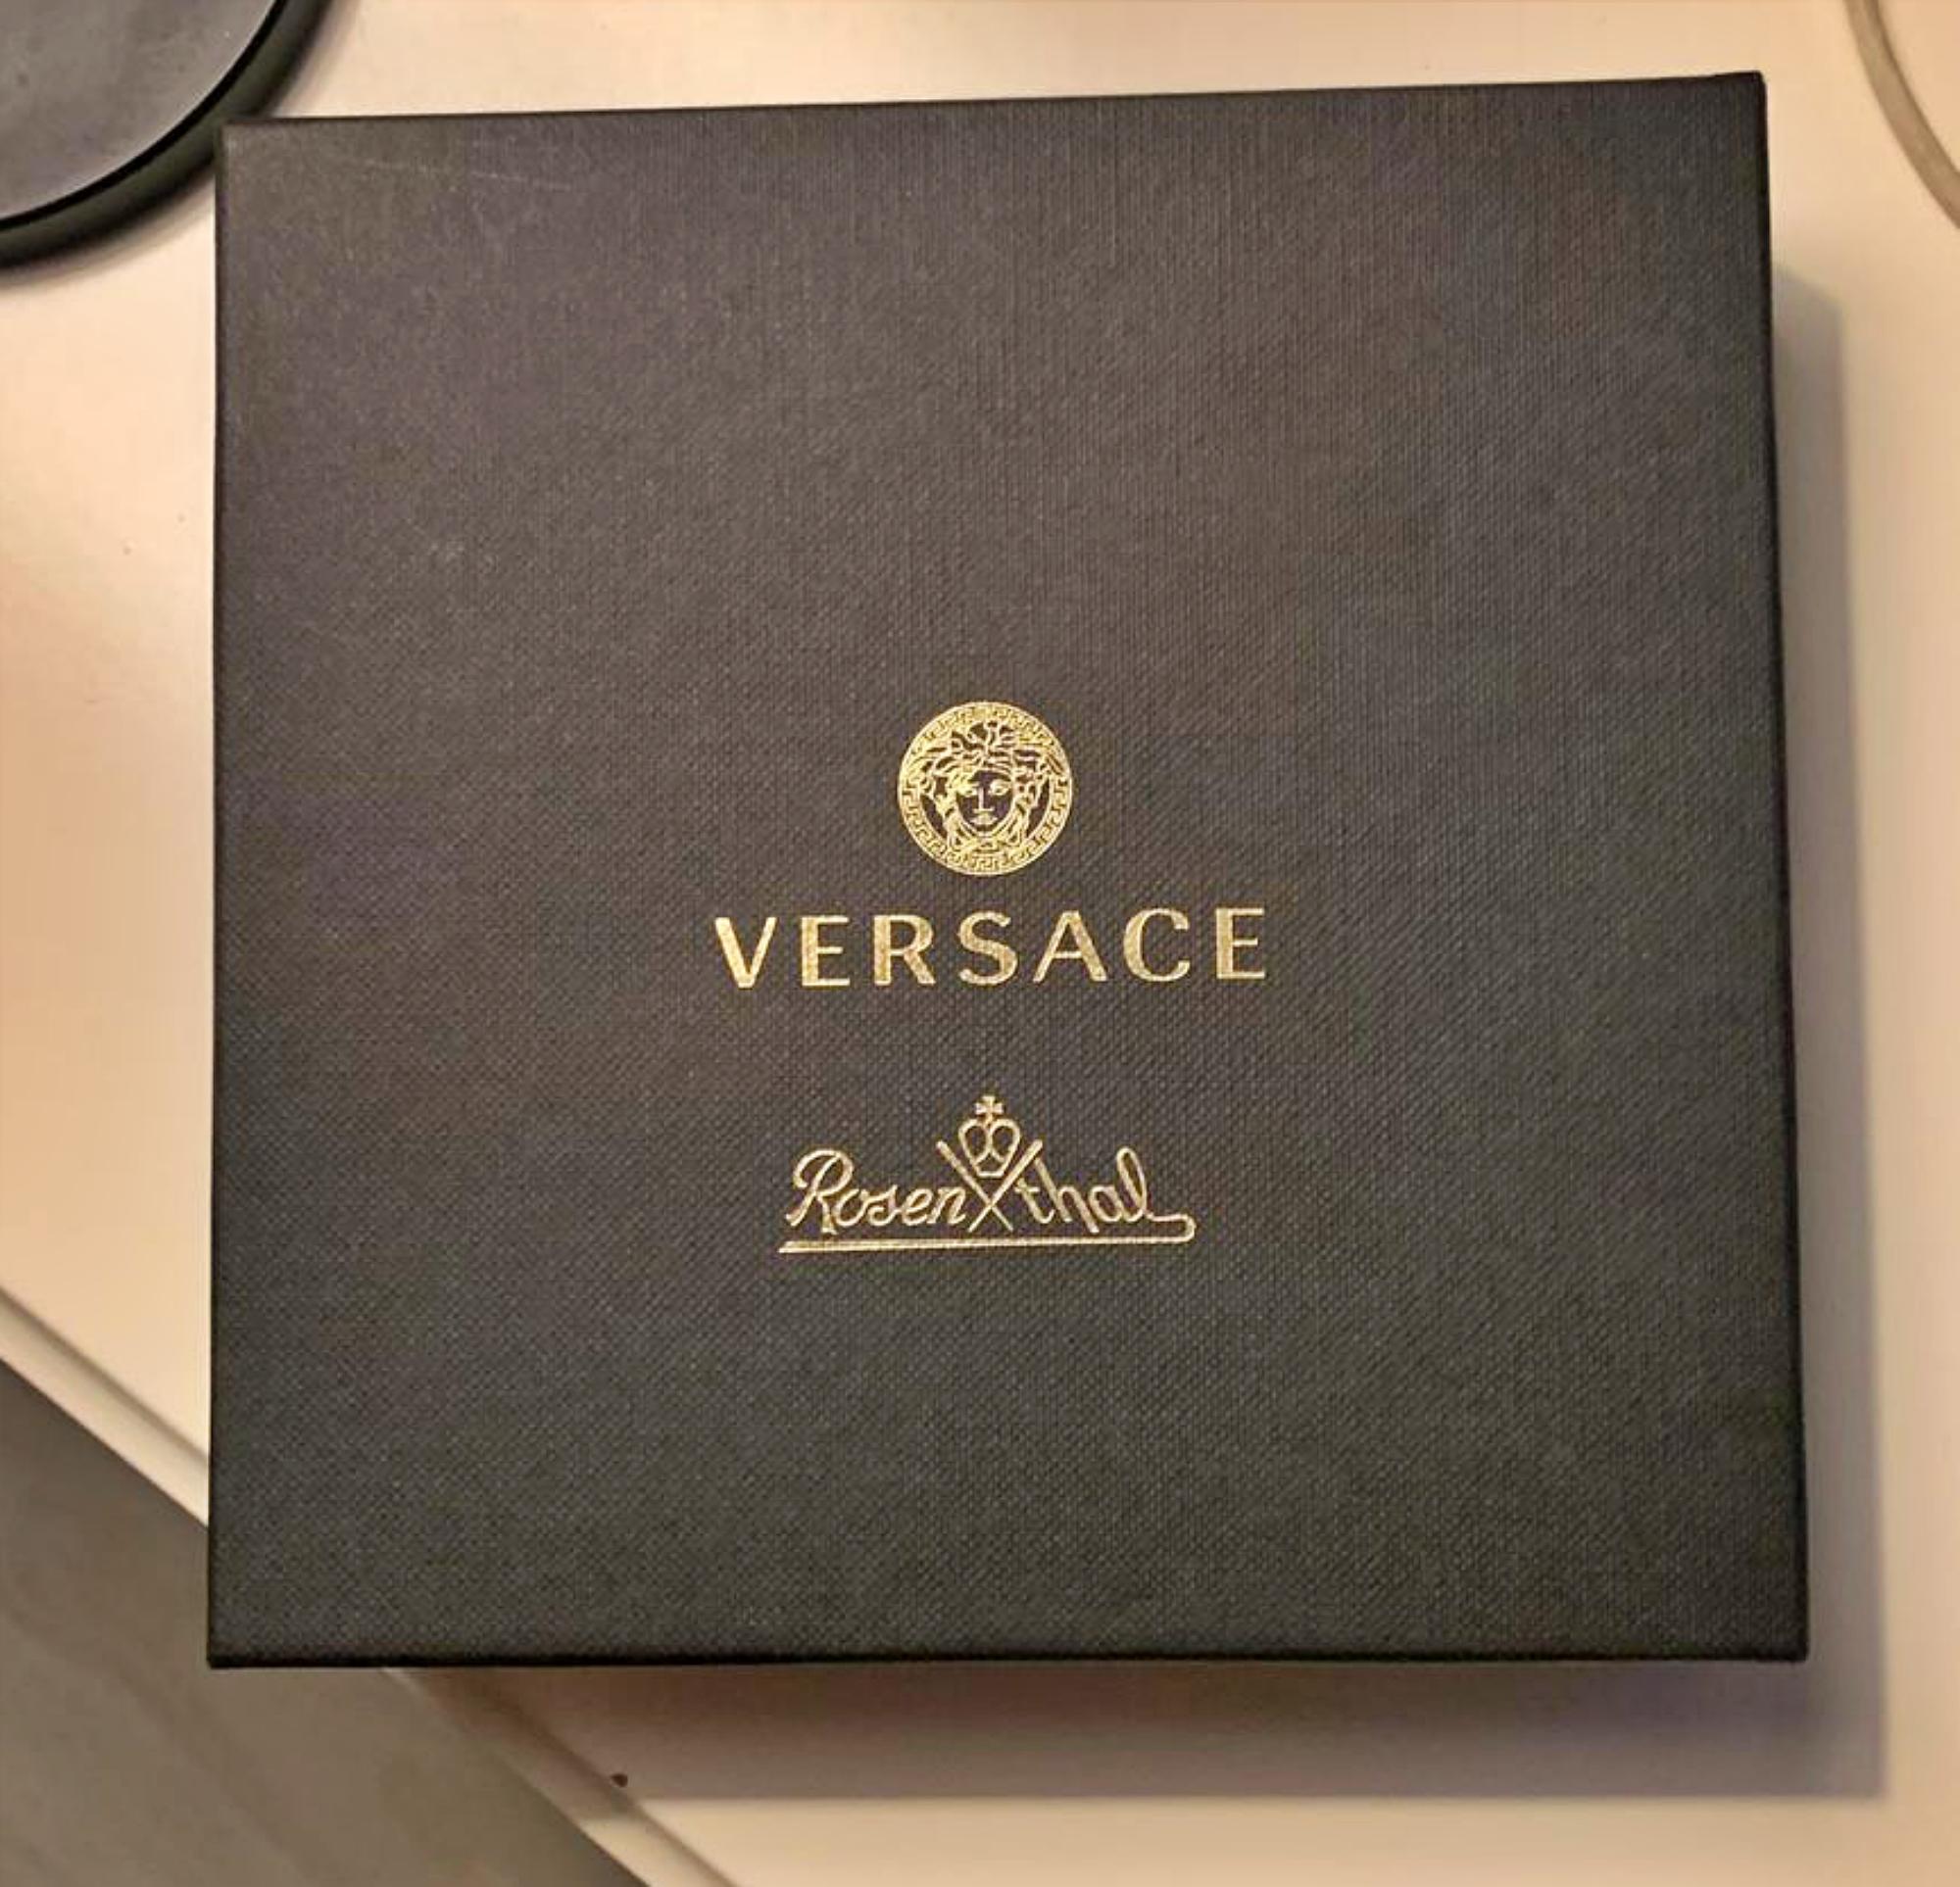 NEW Versace Home
Jungle Collection Tray
Brand new tray in original Versace packaging and certificate of authenticity

Bring epic Italian glamour to your table with Versace’s latest Jungle Animalier collection of fine porcelain for Rosenthal. It